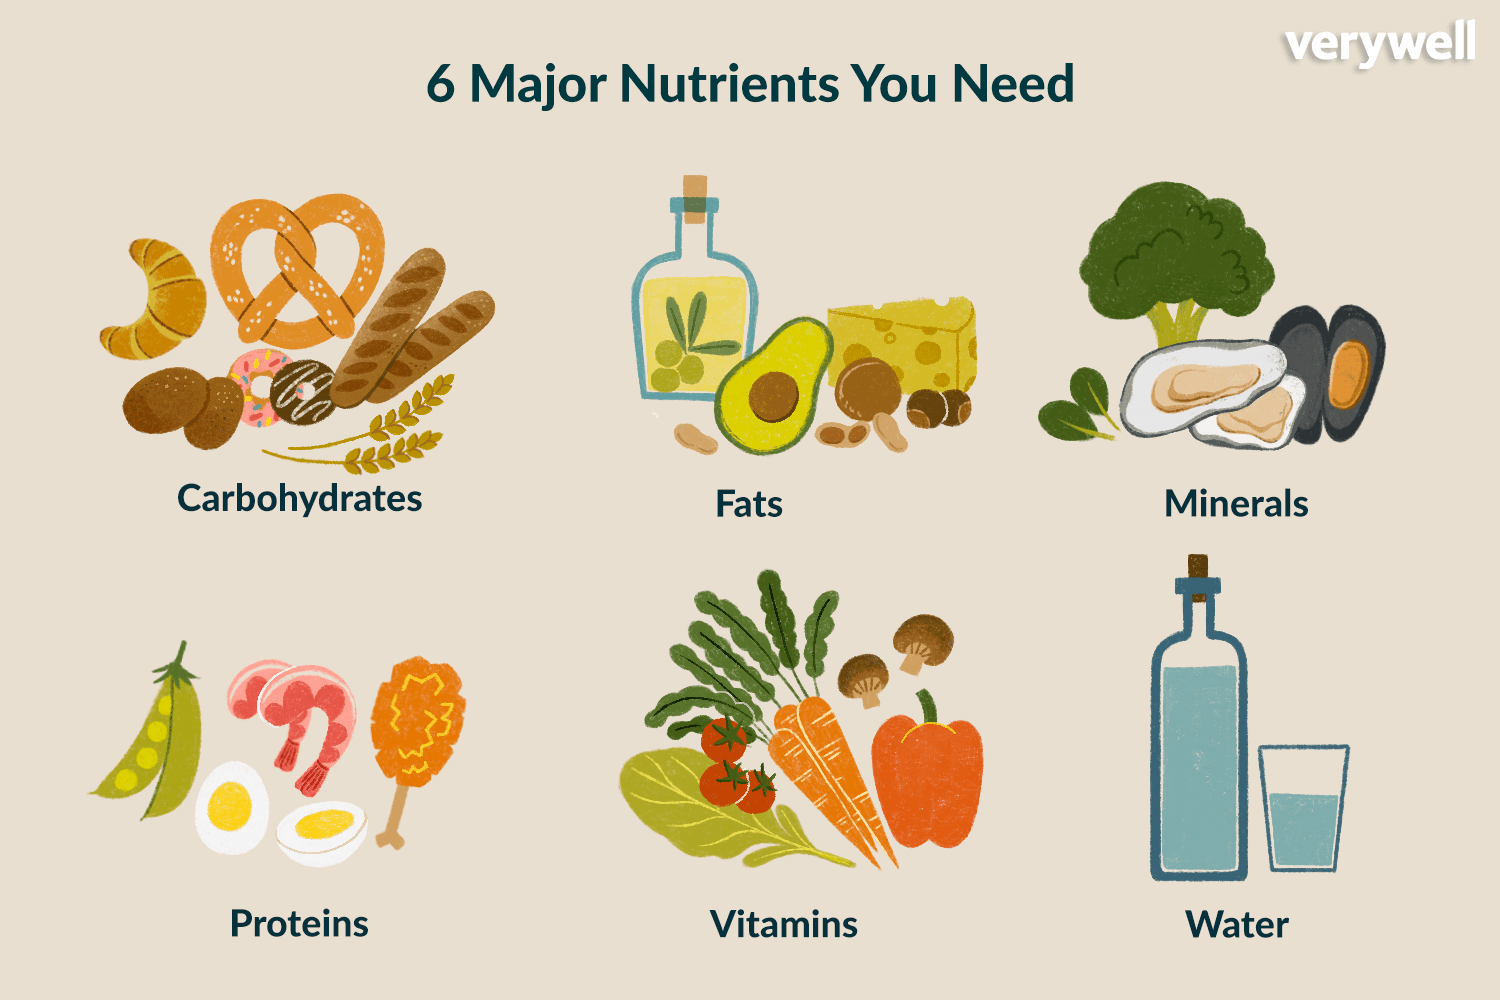 What Are Nutrients and Why Are They Important?